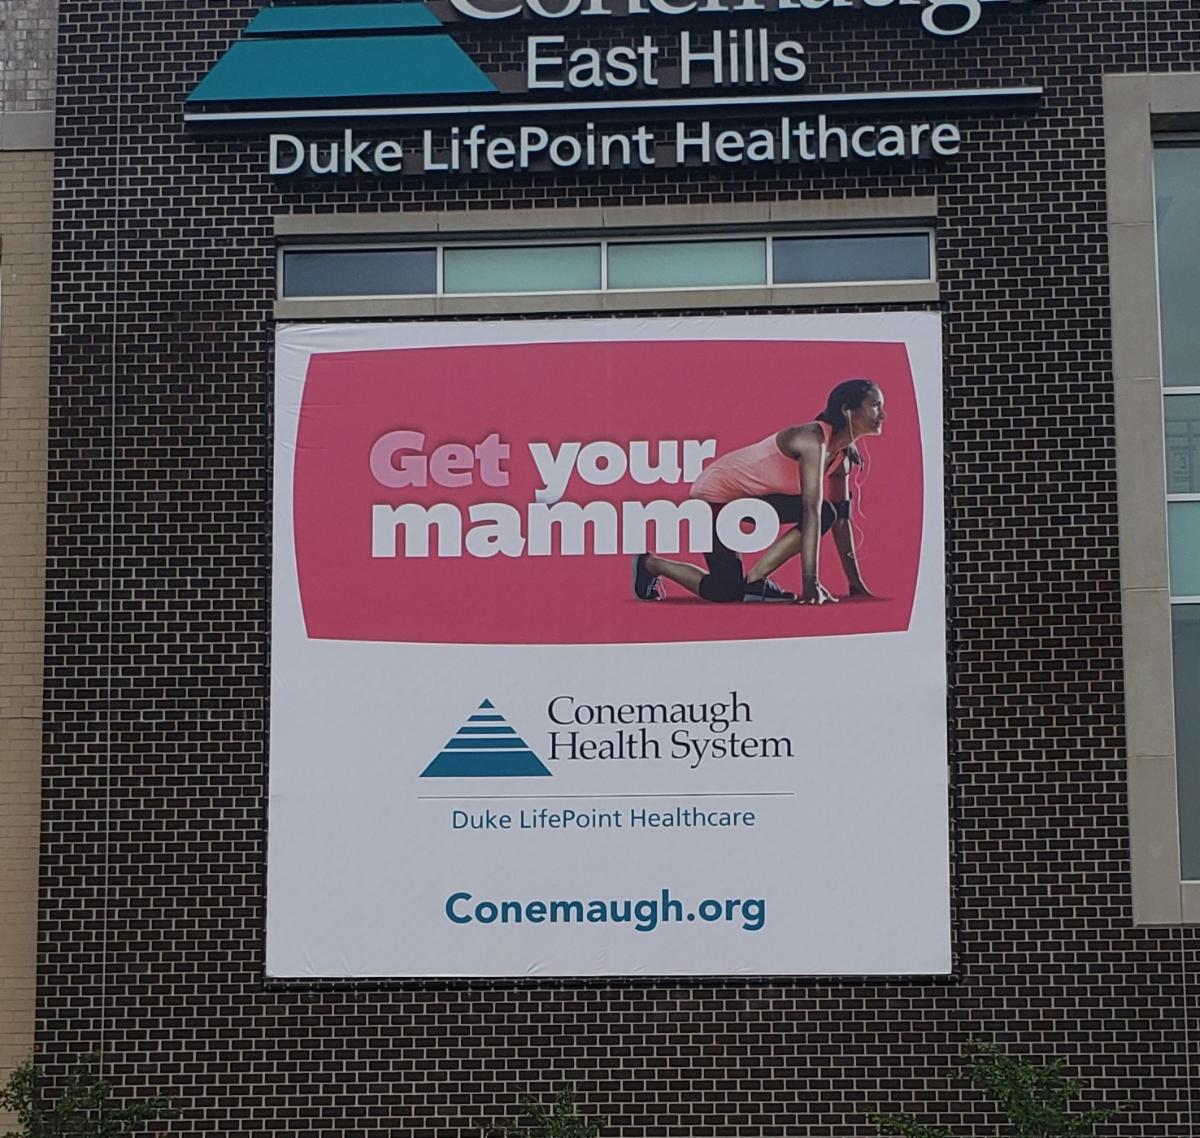 A Lind SignSpring Product – BannerFrameCLASSIC Without Covers for Conemaugh Health System on an exterior brick wall